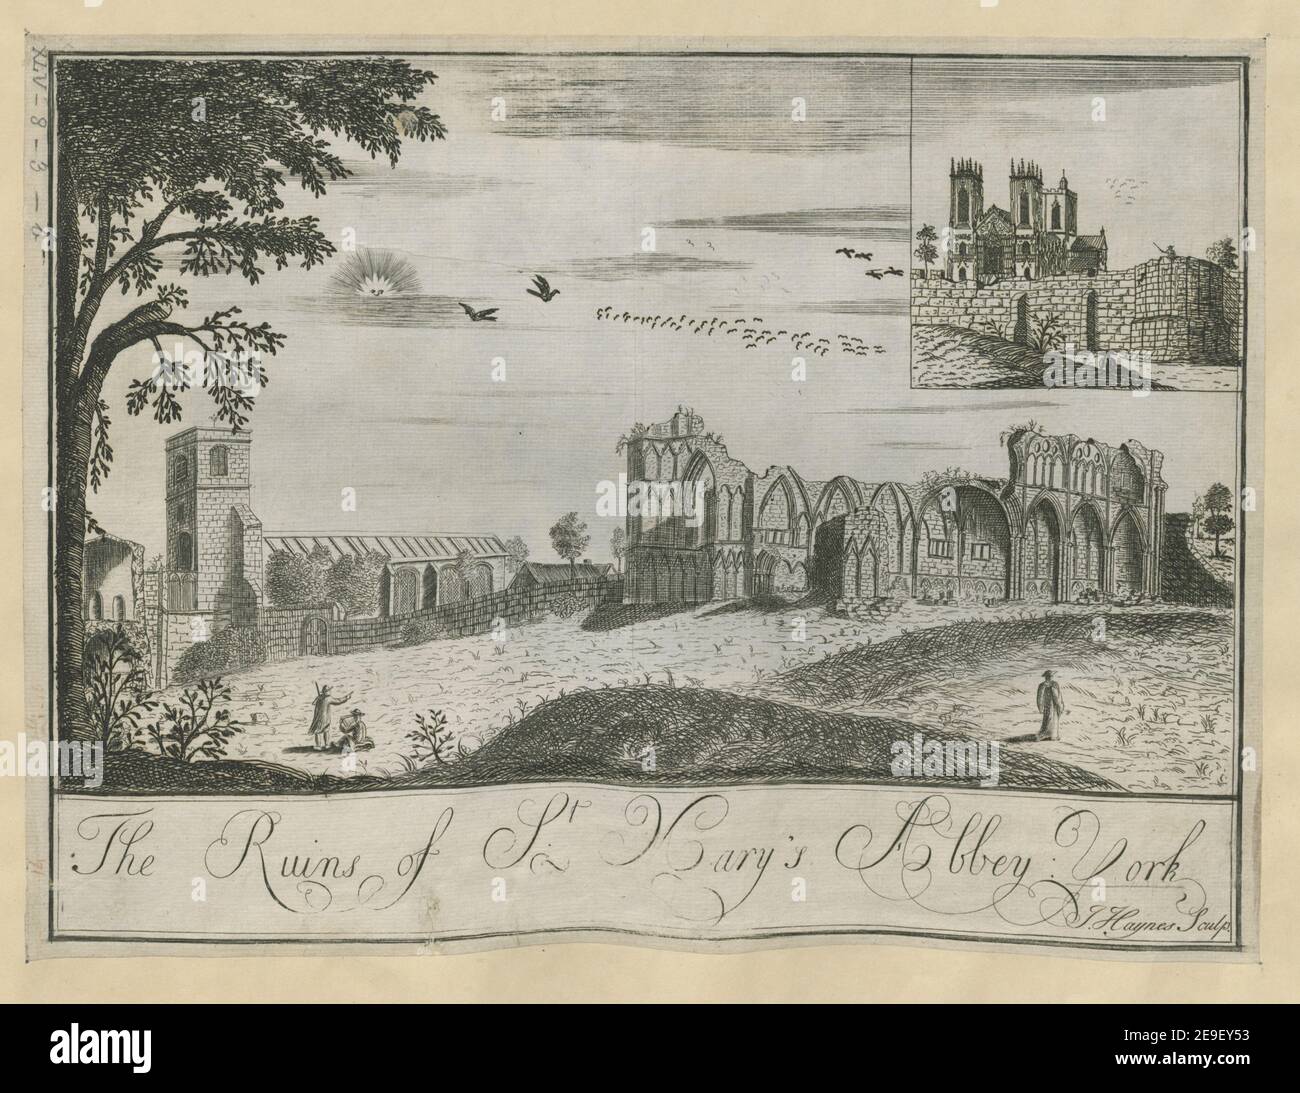 The Ruins of St. Mary's Abbey. York.  Author  Haynes, John 45.8.3.b. Place of publication: [London , York] Publisher: [Sold by Thomas Hammond, Inn, bookseller in High-Ouzegate; at the Printing-Office in Coffee-Yard, York: and by A. Bettesworth, in Pater-Noster-Row, London] Date of publication: [1730]  Item type: 1 print Medium: etching Dimensions: platemark 44.4 x 32.9 cm  Former owner: George III, King of Great Britain, 1738-1820 Stock Photo